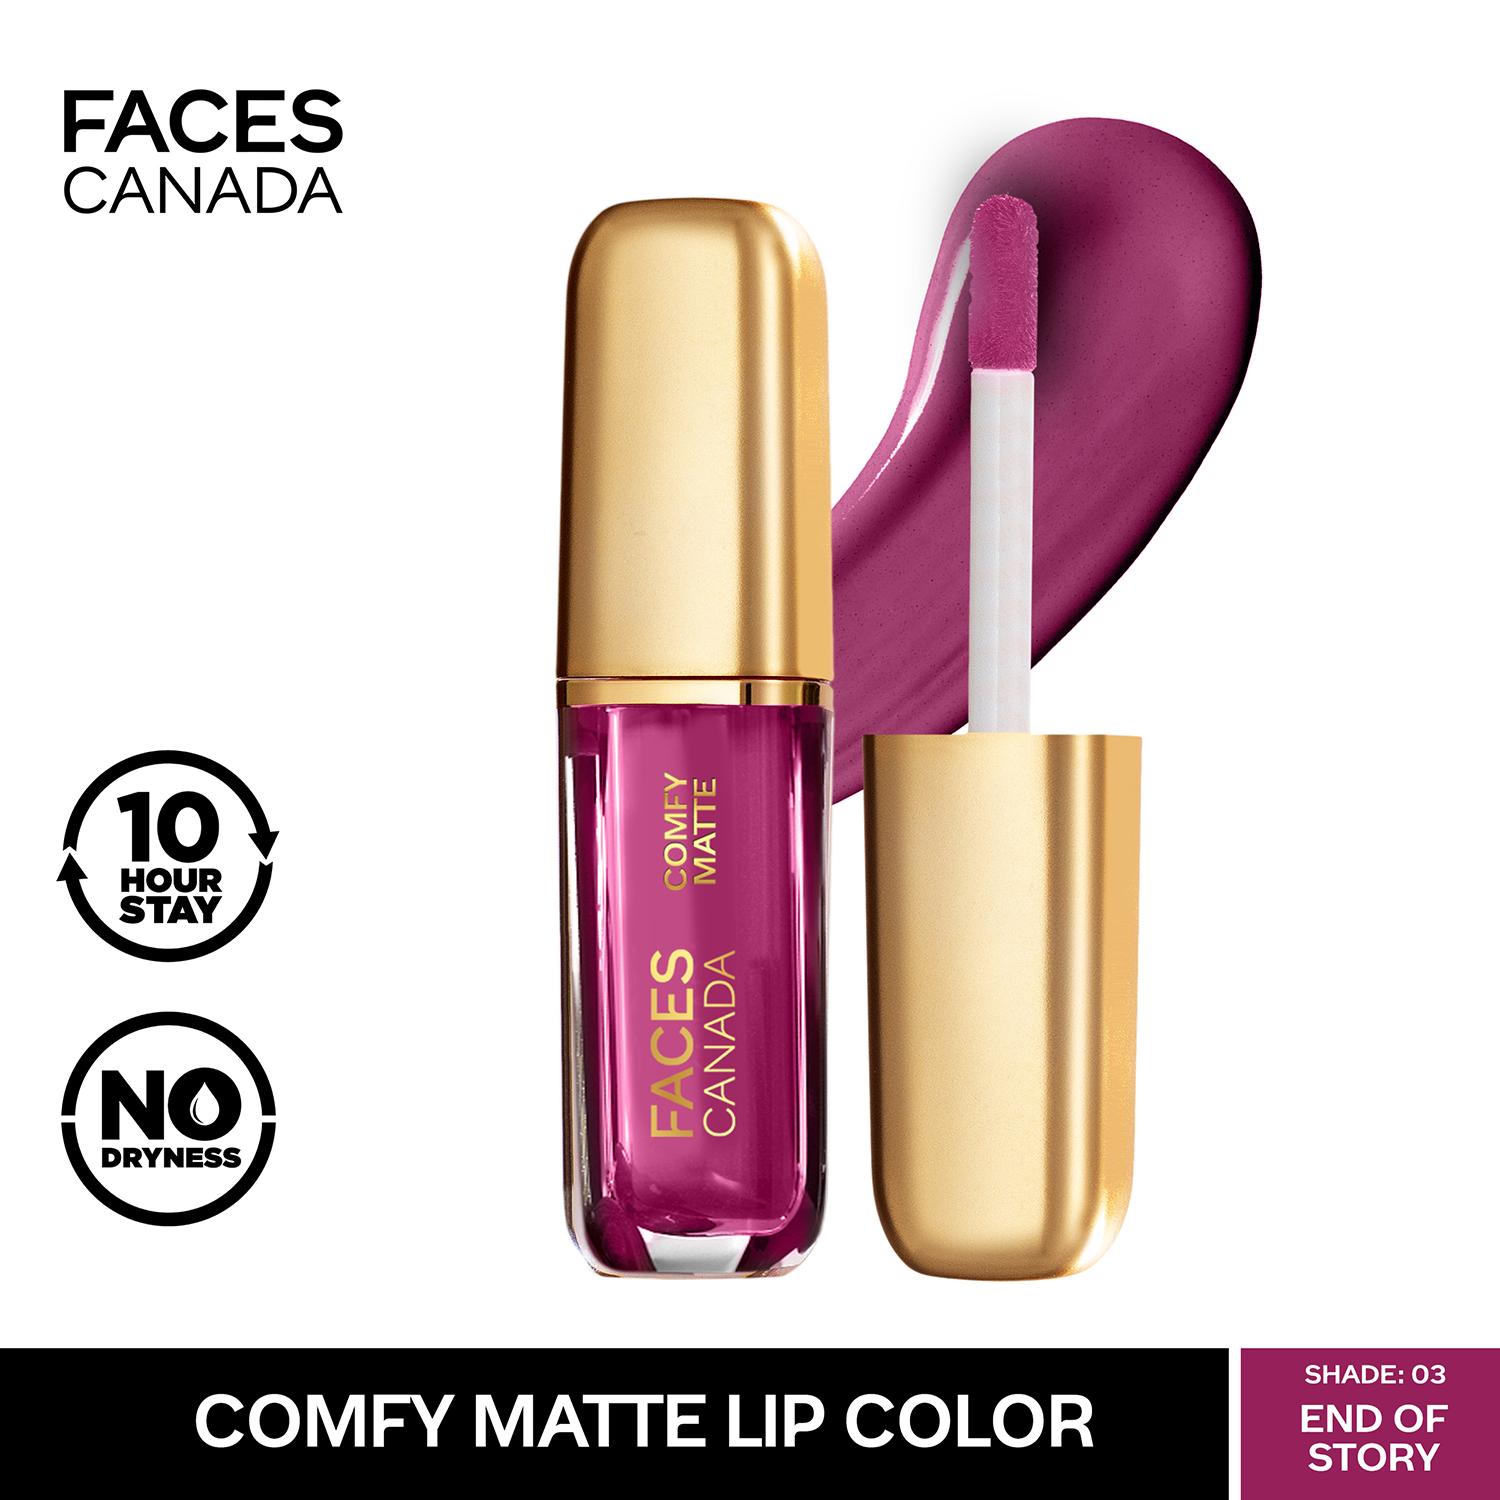 Faces Canada | Faces Canada Comfy Matte Liquid Lipstick - End Of Story 03, 10HR Stay, No Dryness (1.2 ml)